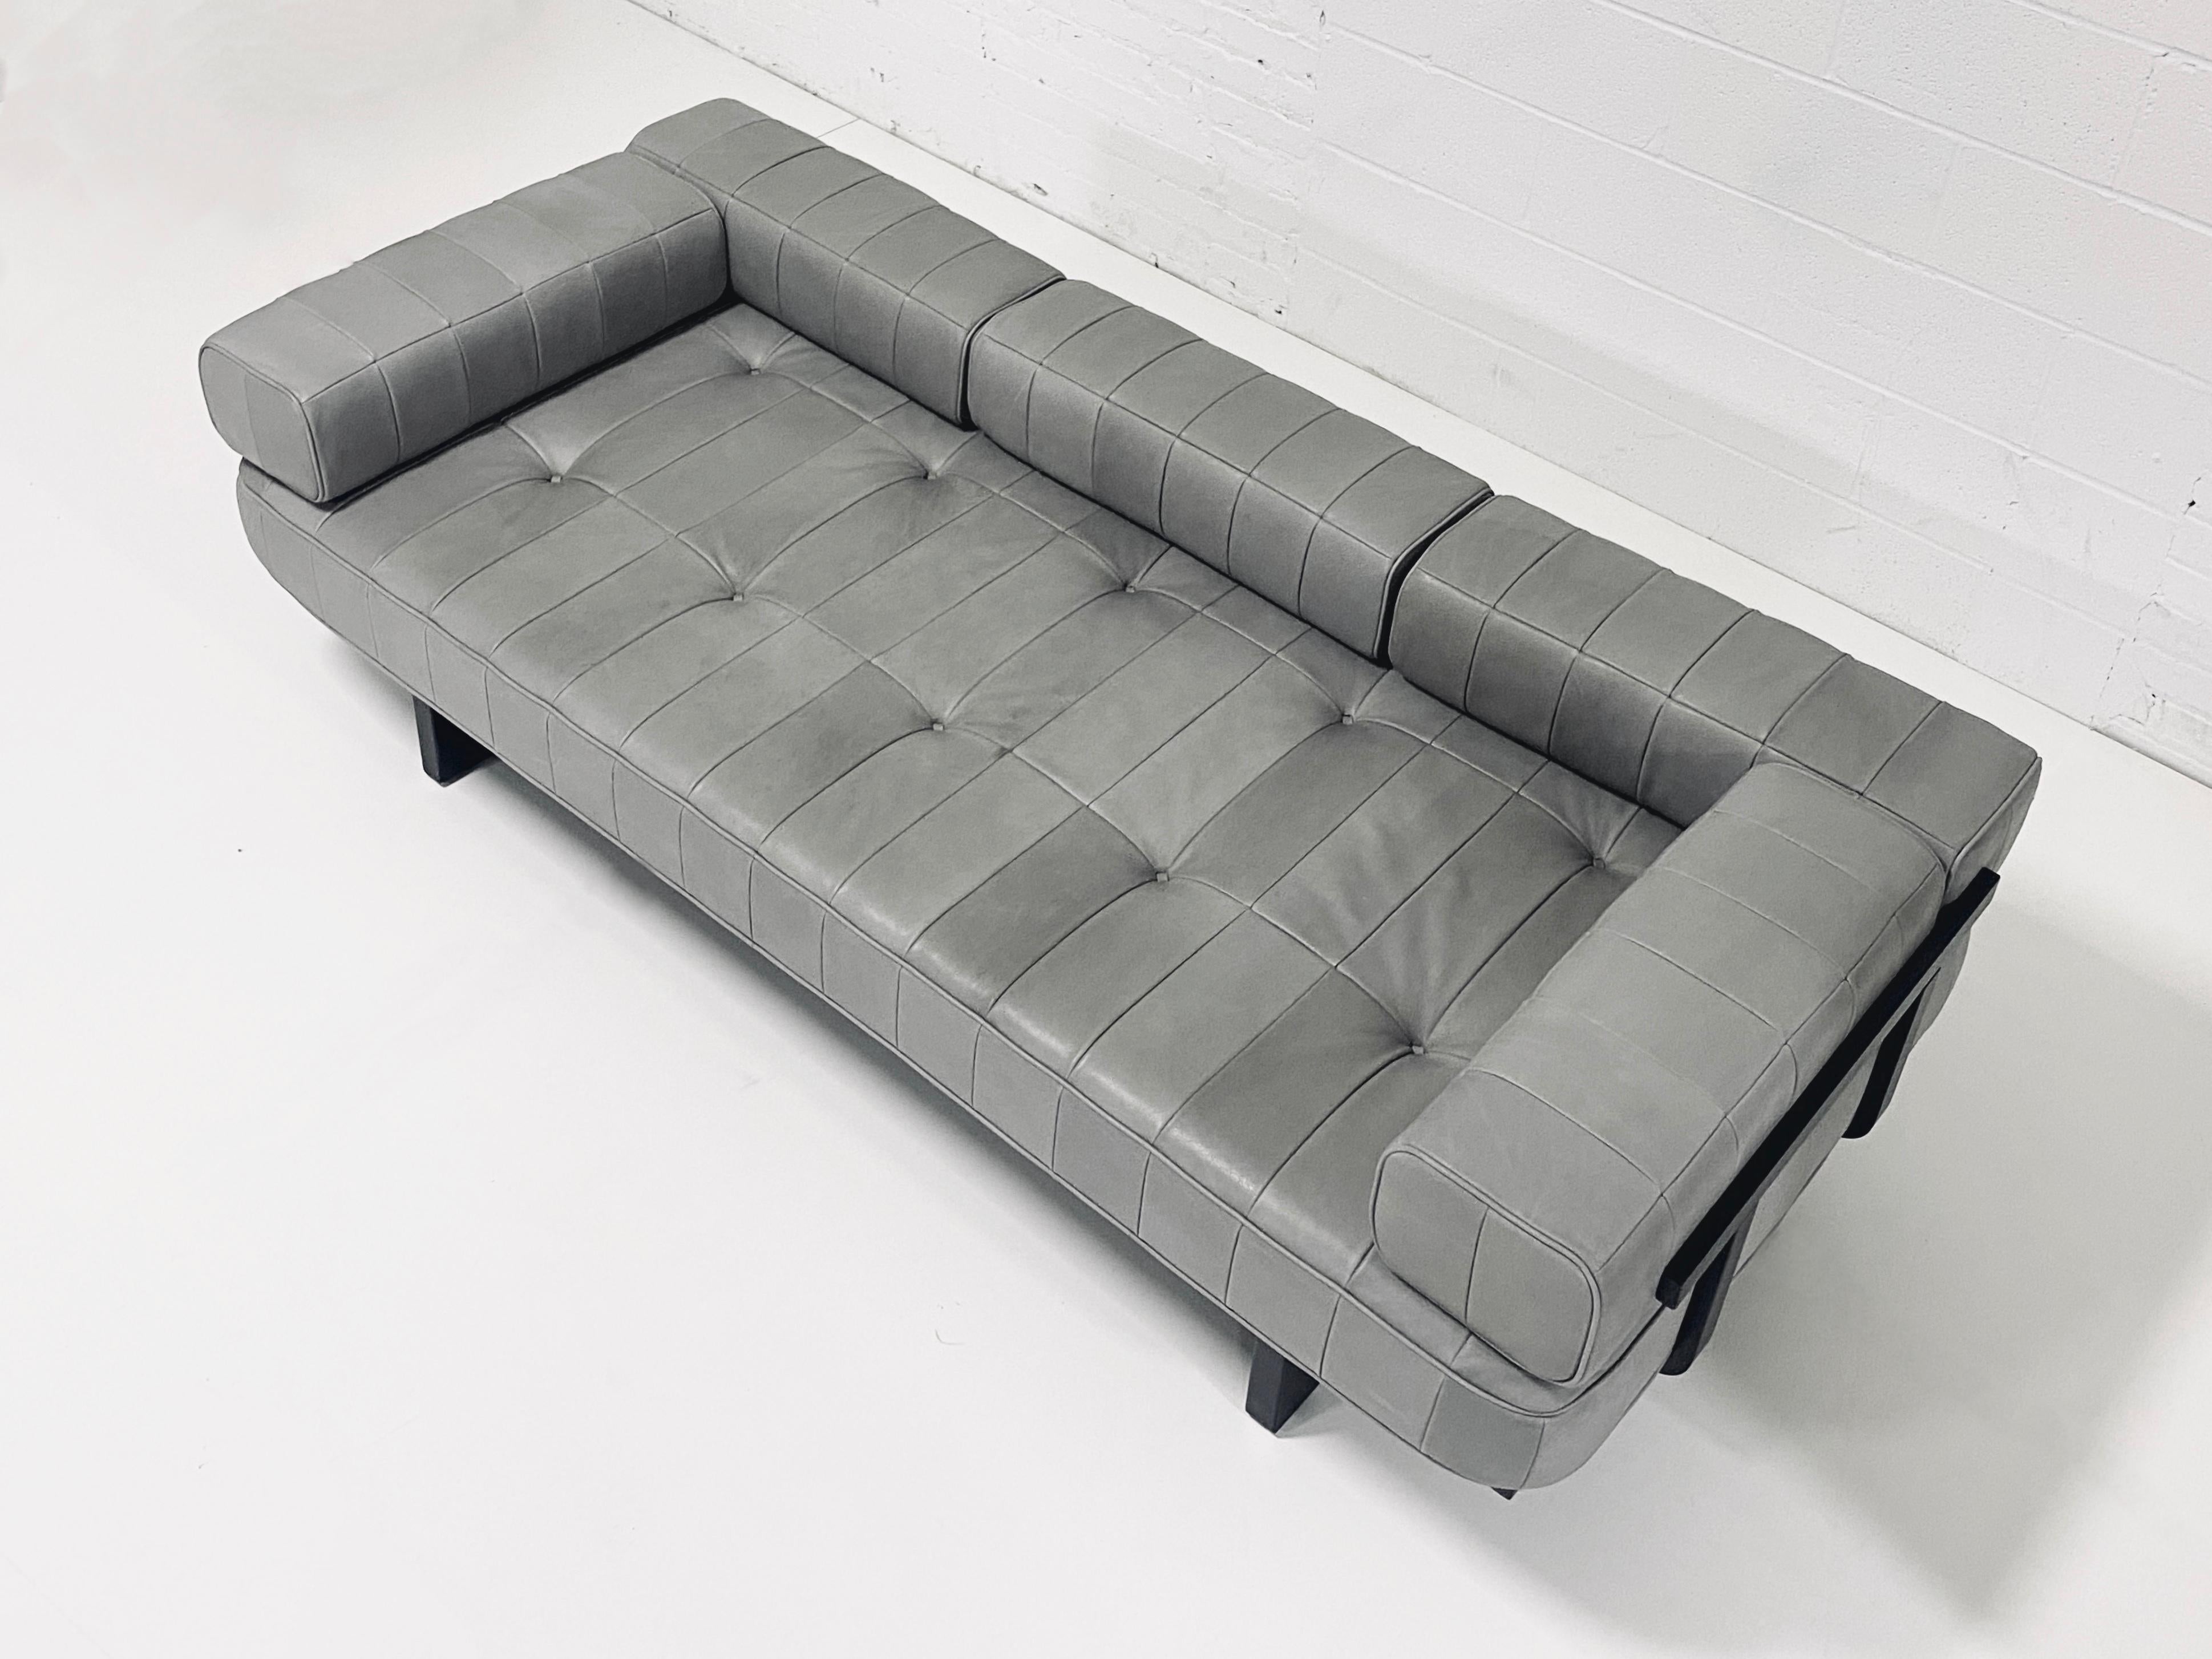 Leather patchwork sofa by De Sede. Model DS. 80. Back and arm brackets can be removed/adjusted to fit desired use. Grey leather and black Lacquer frame are all original and in excellent vintage condition.